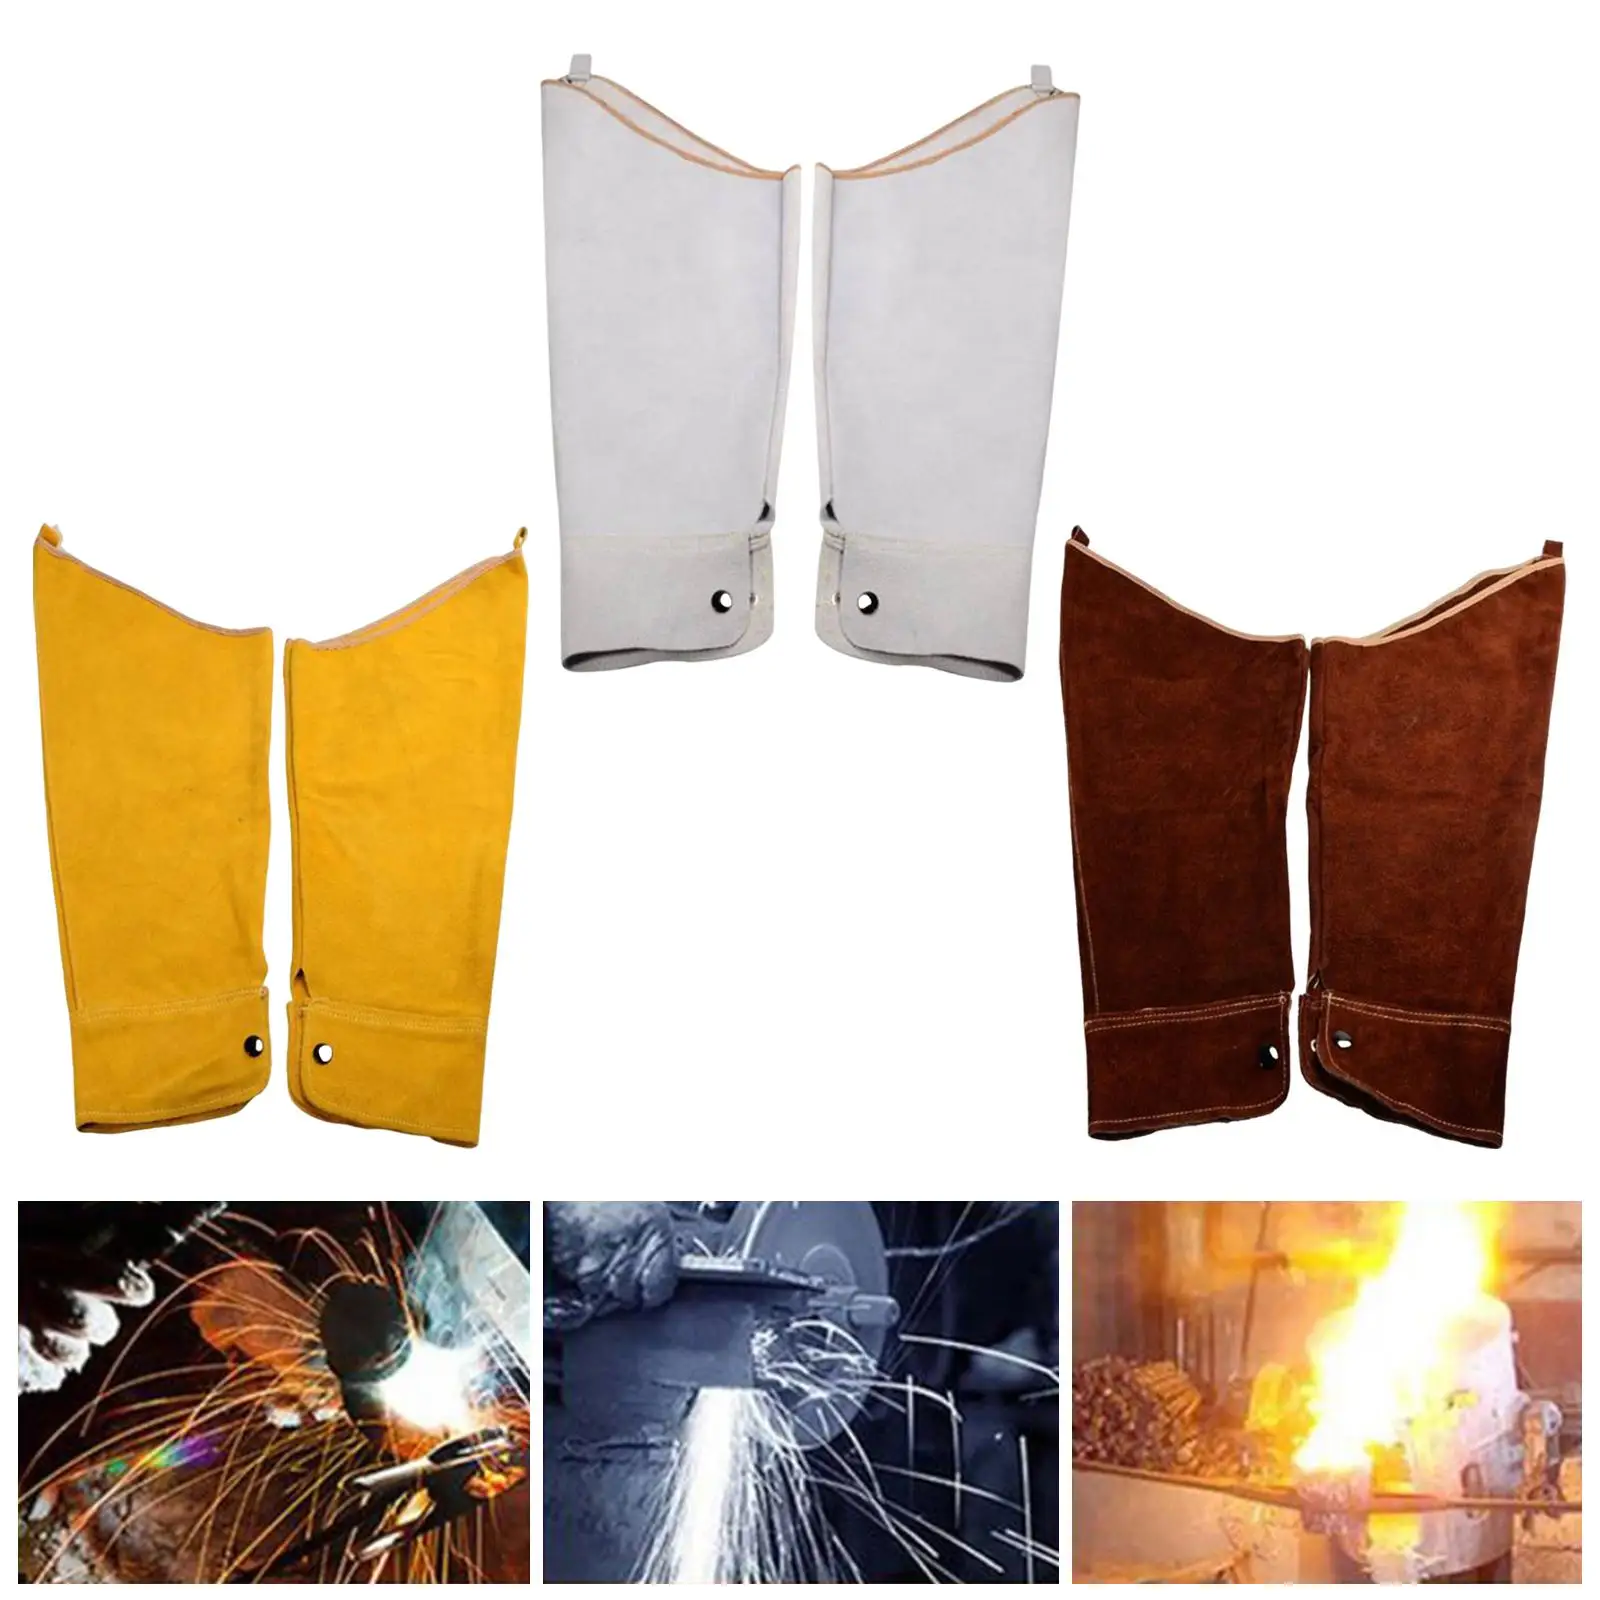 60cm Long Welding Sleeves Heat Resistant Artificial Leather with Elastic Cuff Arm Protection Welder Protective Supplies